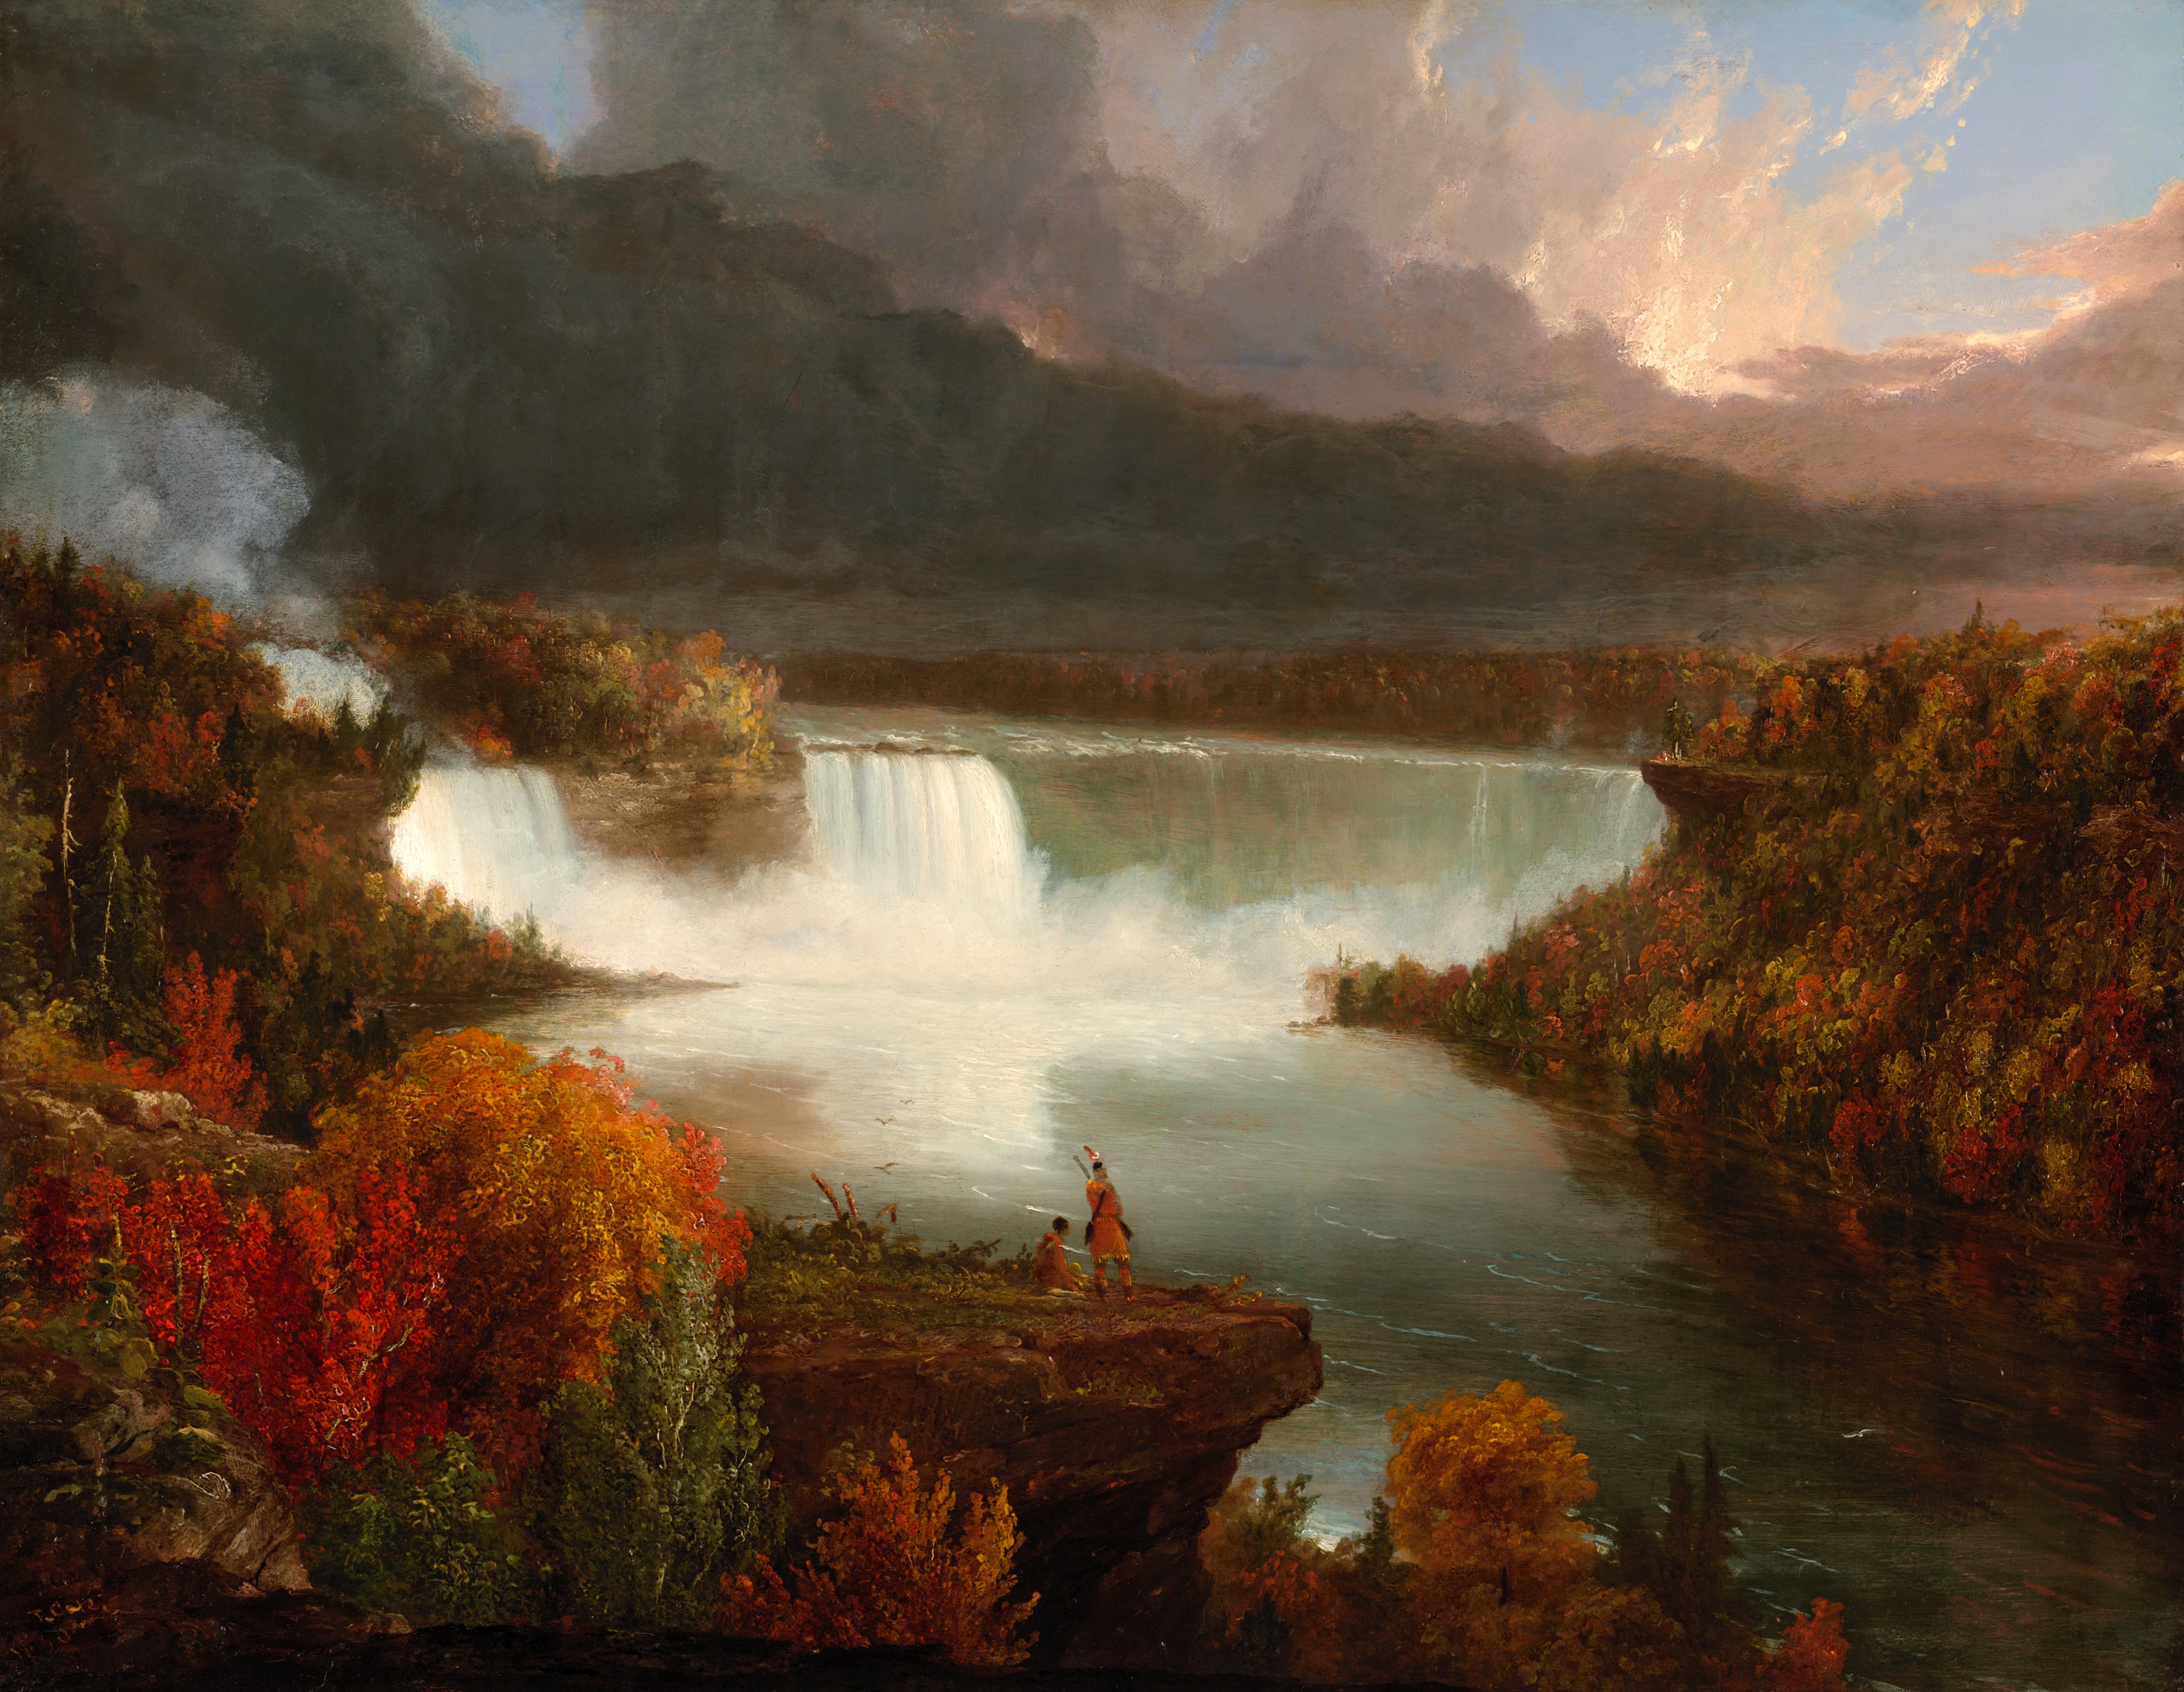 Distant View of Niagara Falls by Thomas Cole - 1830 - 47.9 × 60.6 cm Art Institute of Chicago